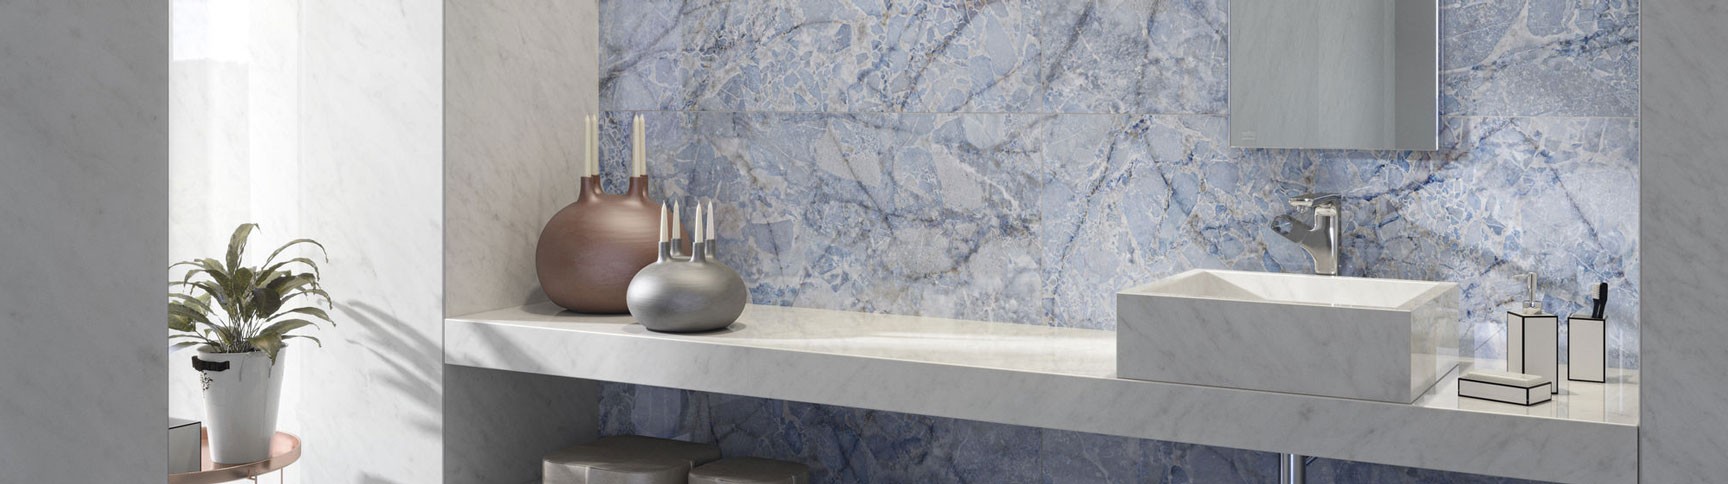 Bathroom Wall Tiles | Porcelain Tiles |Great Value Prices